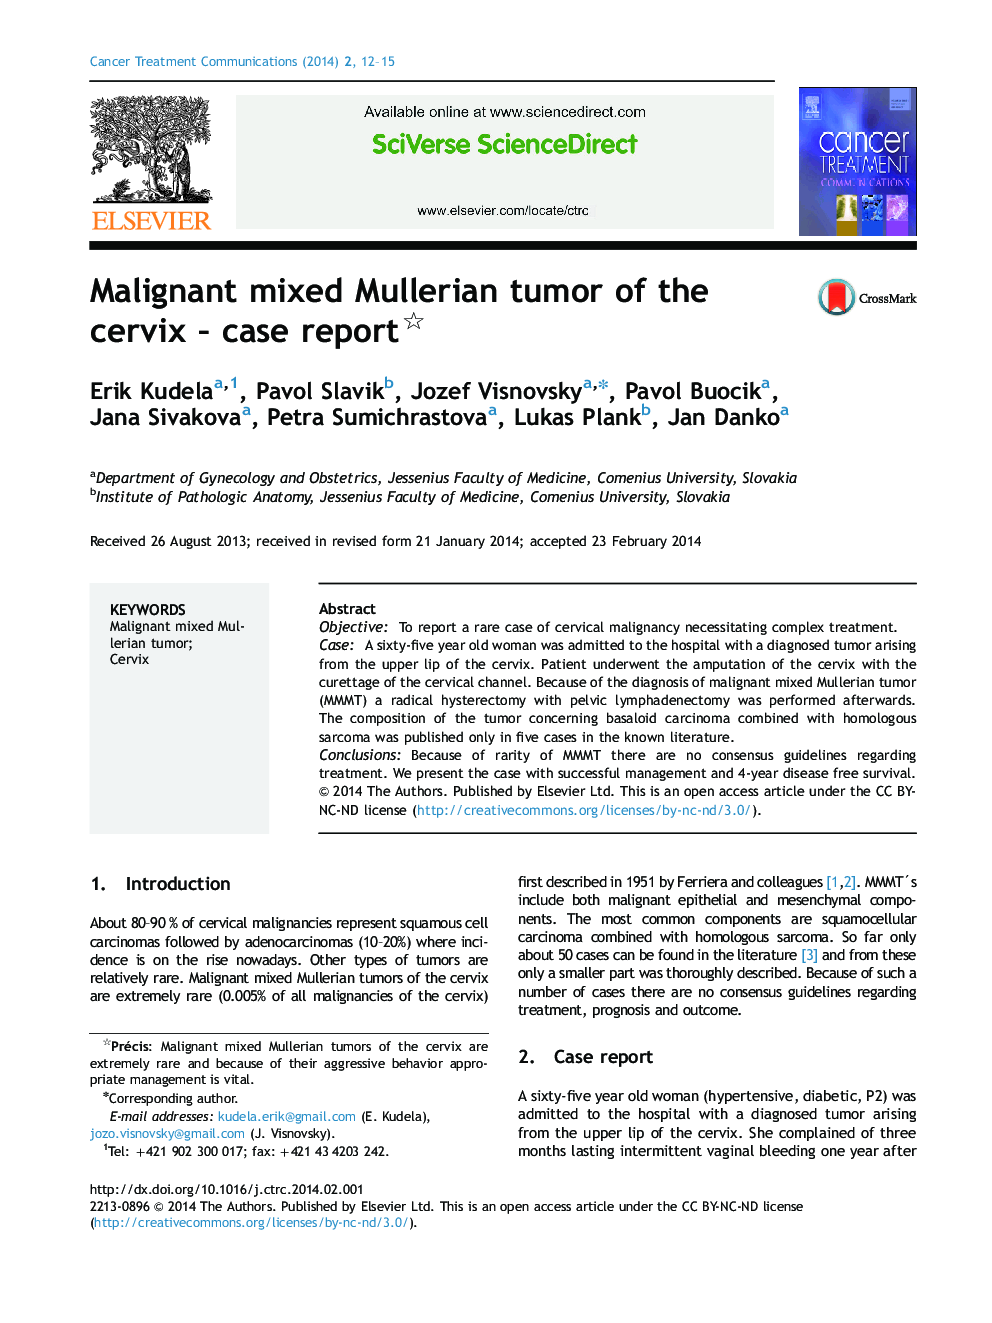 Malignant mixed Mullerian tumor of the cervix – case report 